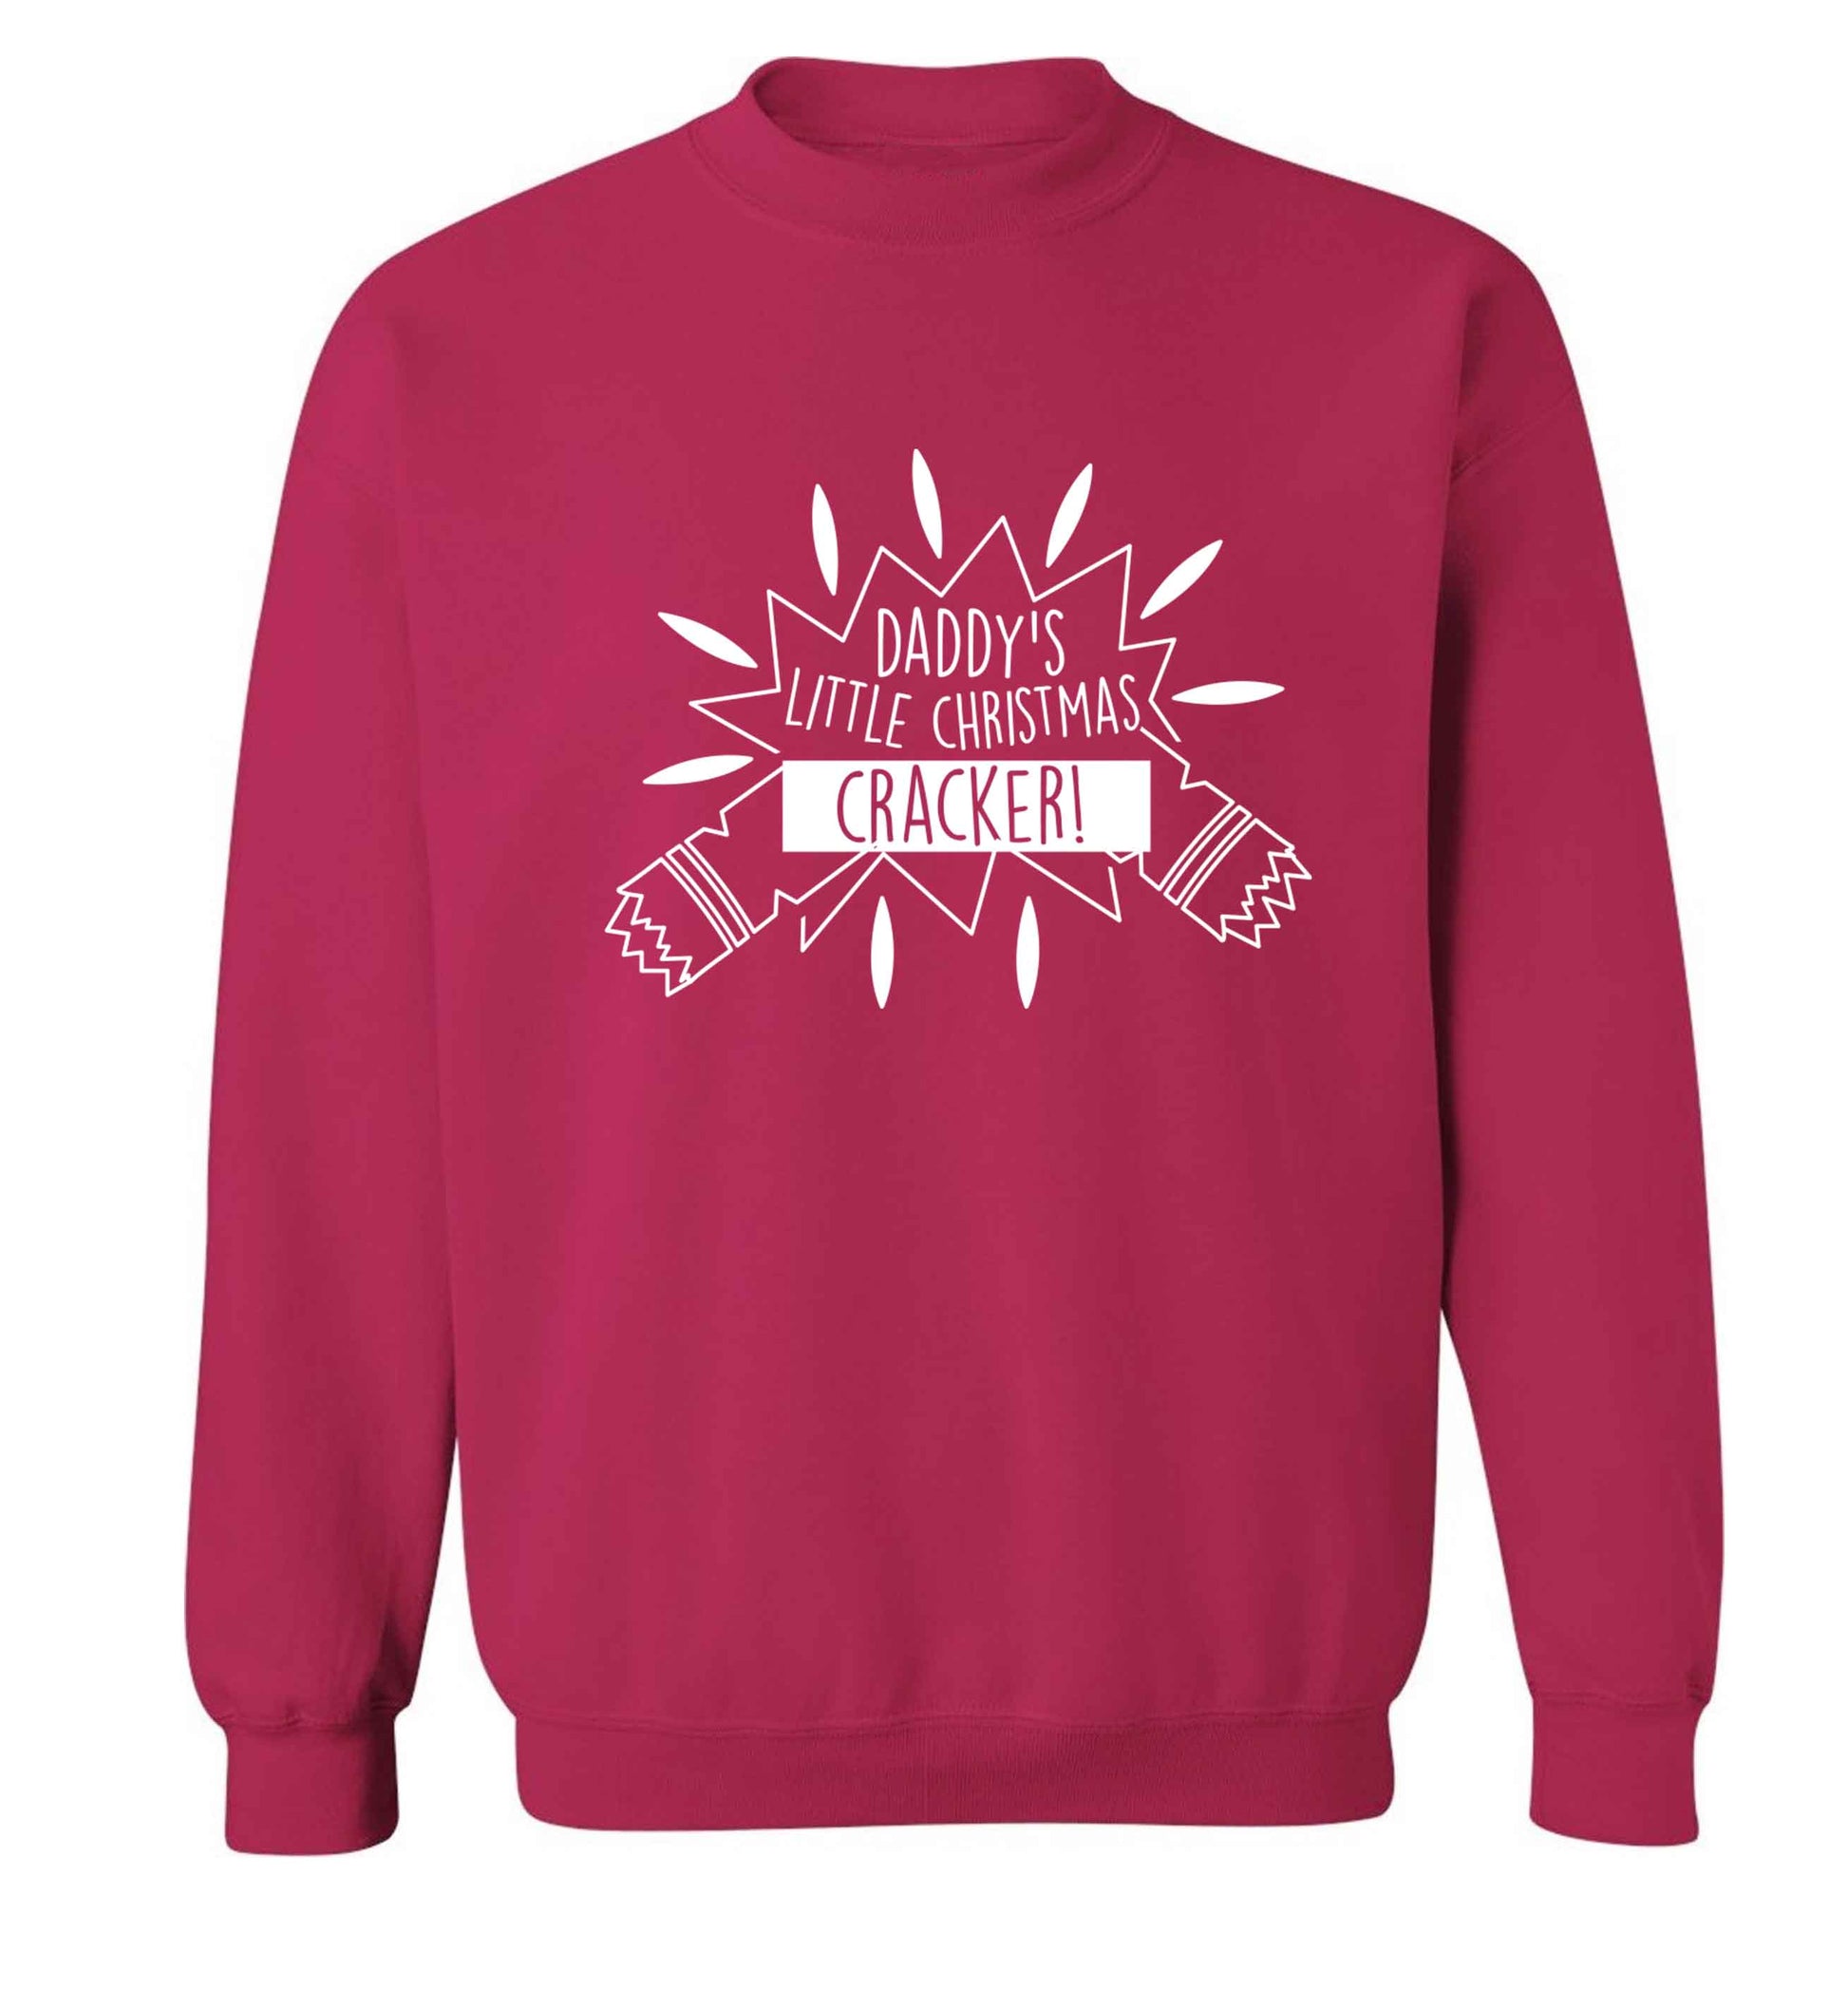 Daddy's little Christmas cracker Adult's unisex pink Sweater 2XL